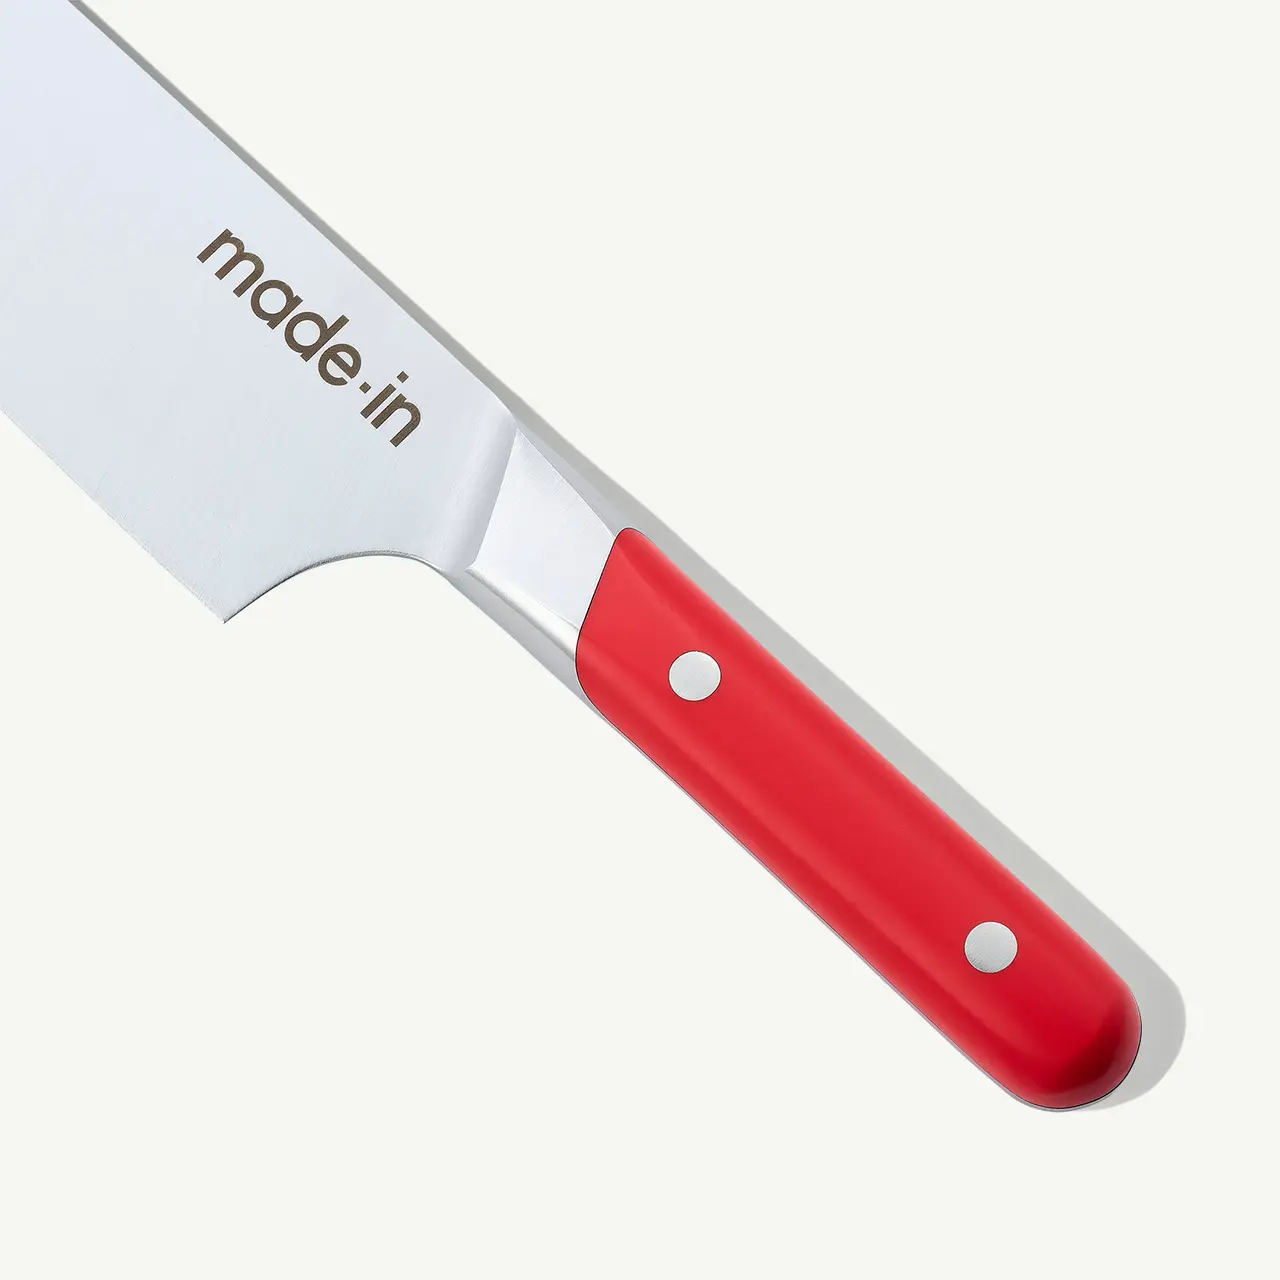 A close-up view shows a kitchen knife with a red handle and the text "made.in" printed on its blade.